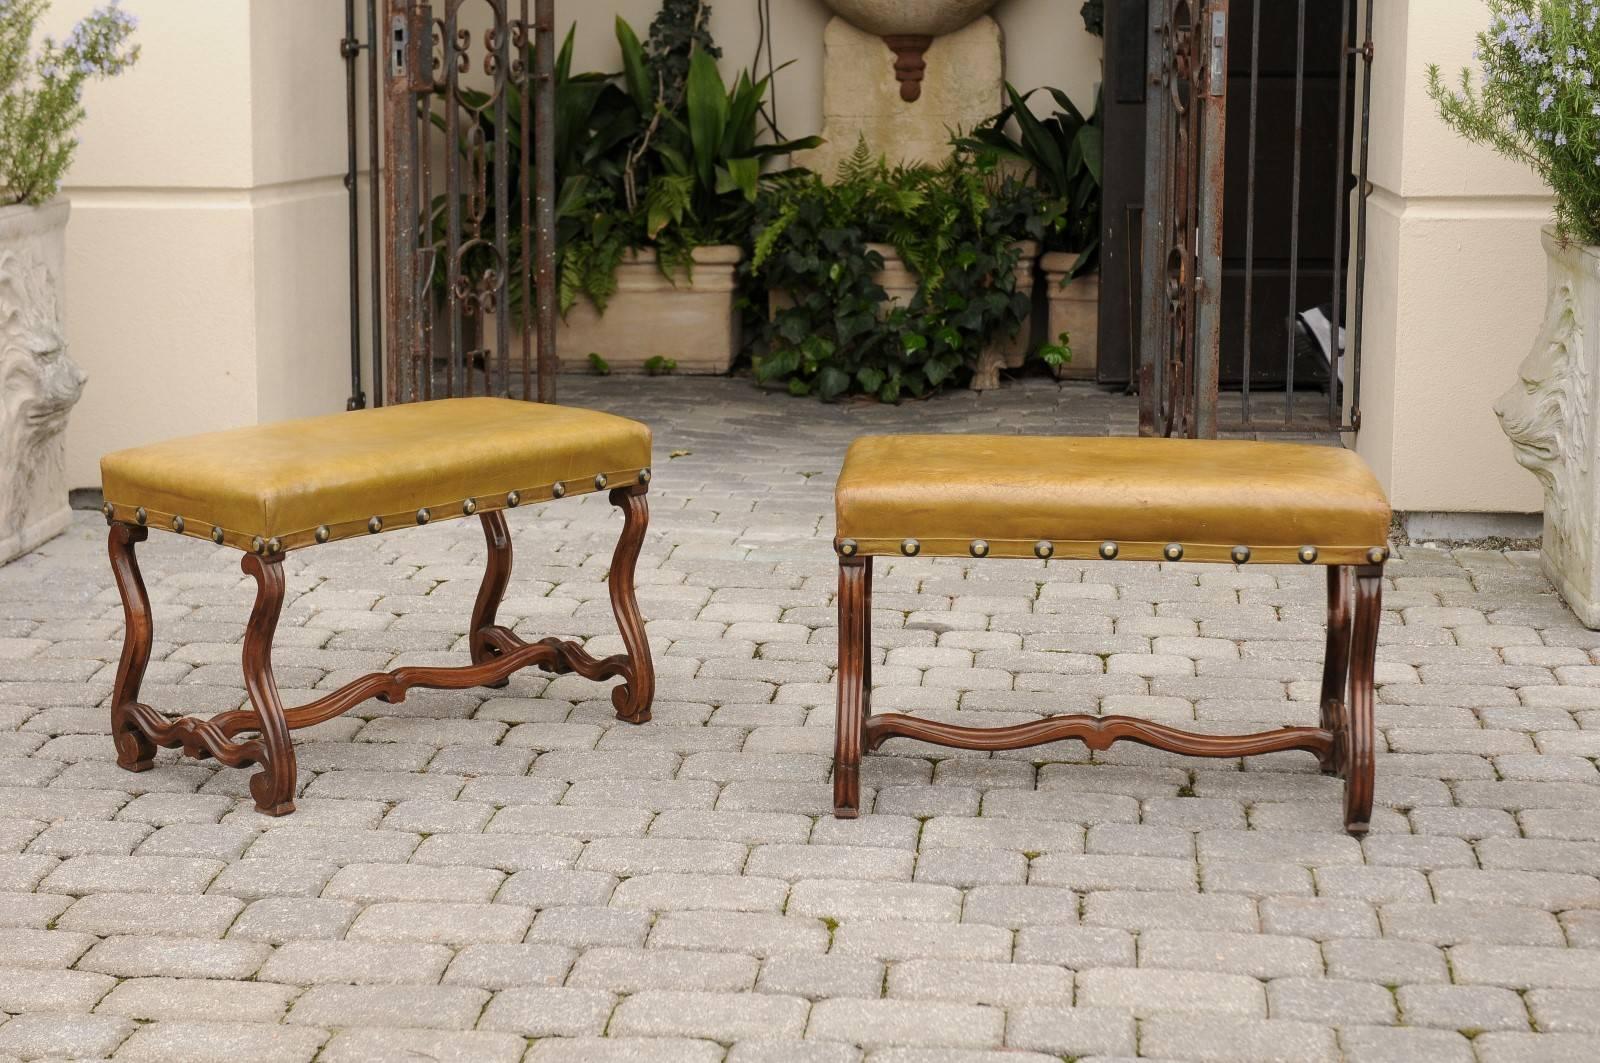 This stylish pair of French 19th century walnut stools or benches features rectangular leather upholstered seats with nailhead surround, over an os de mouton frame: the Louis XIII style body is indeed made of four mutton legs with sinuous cross and